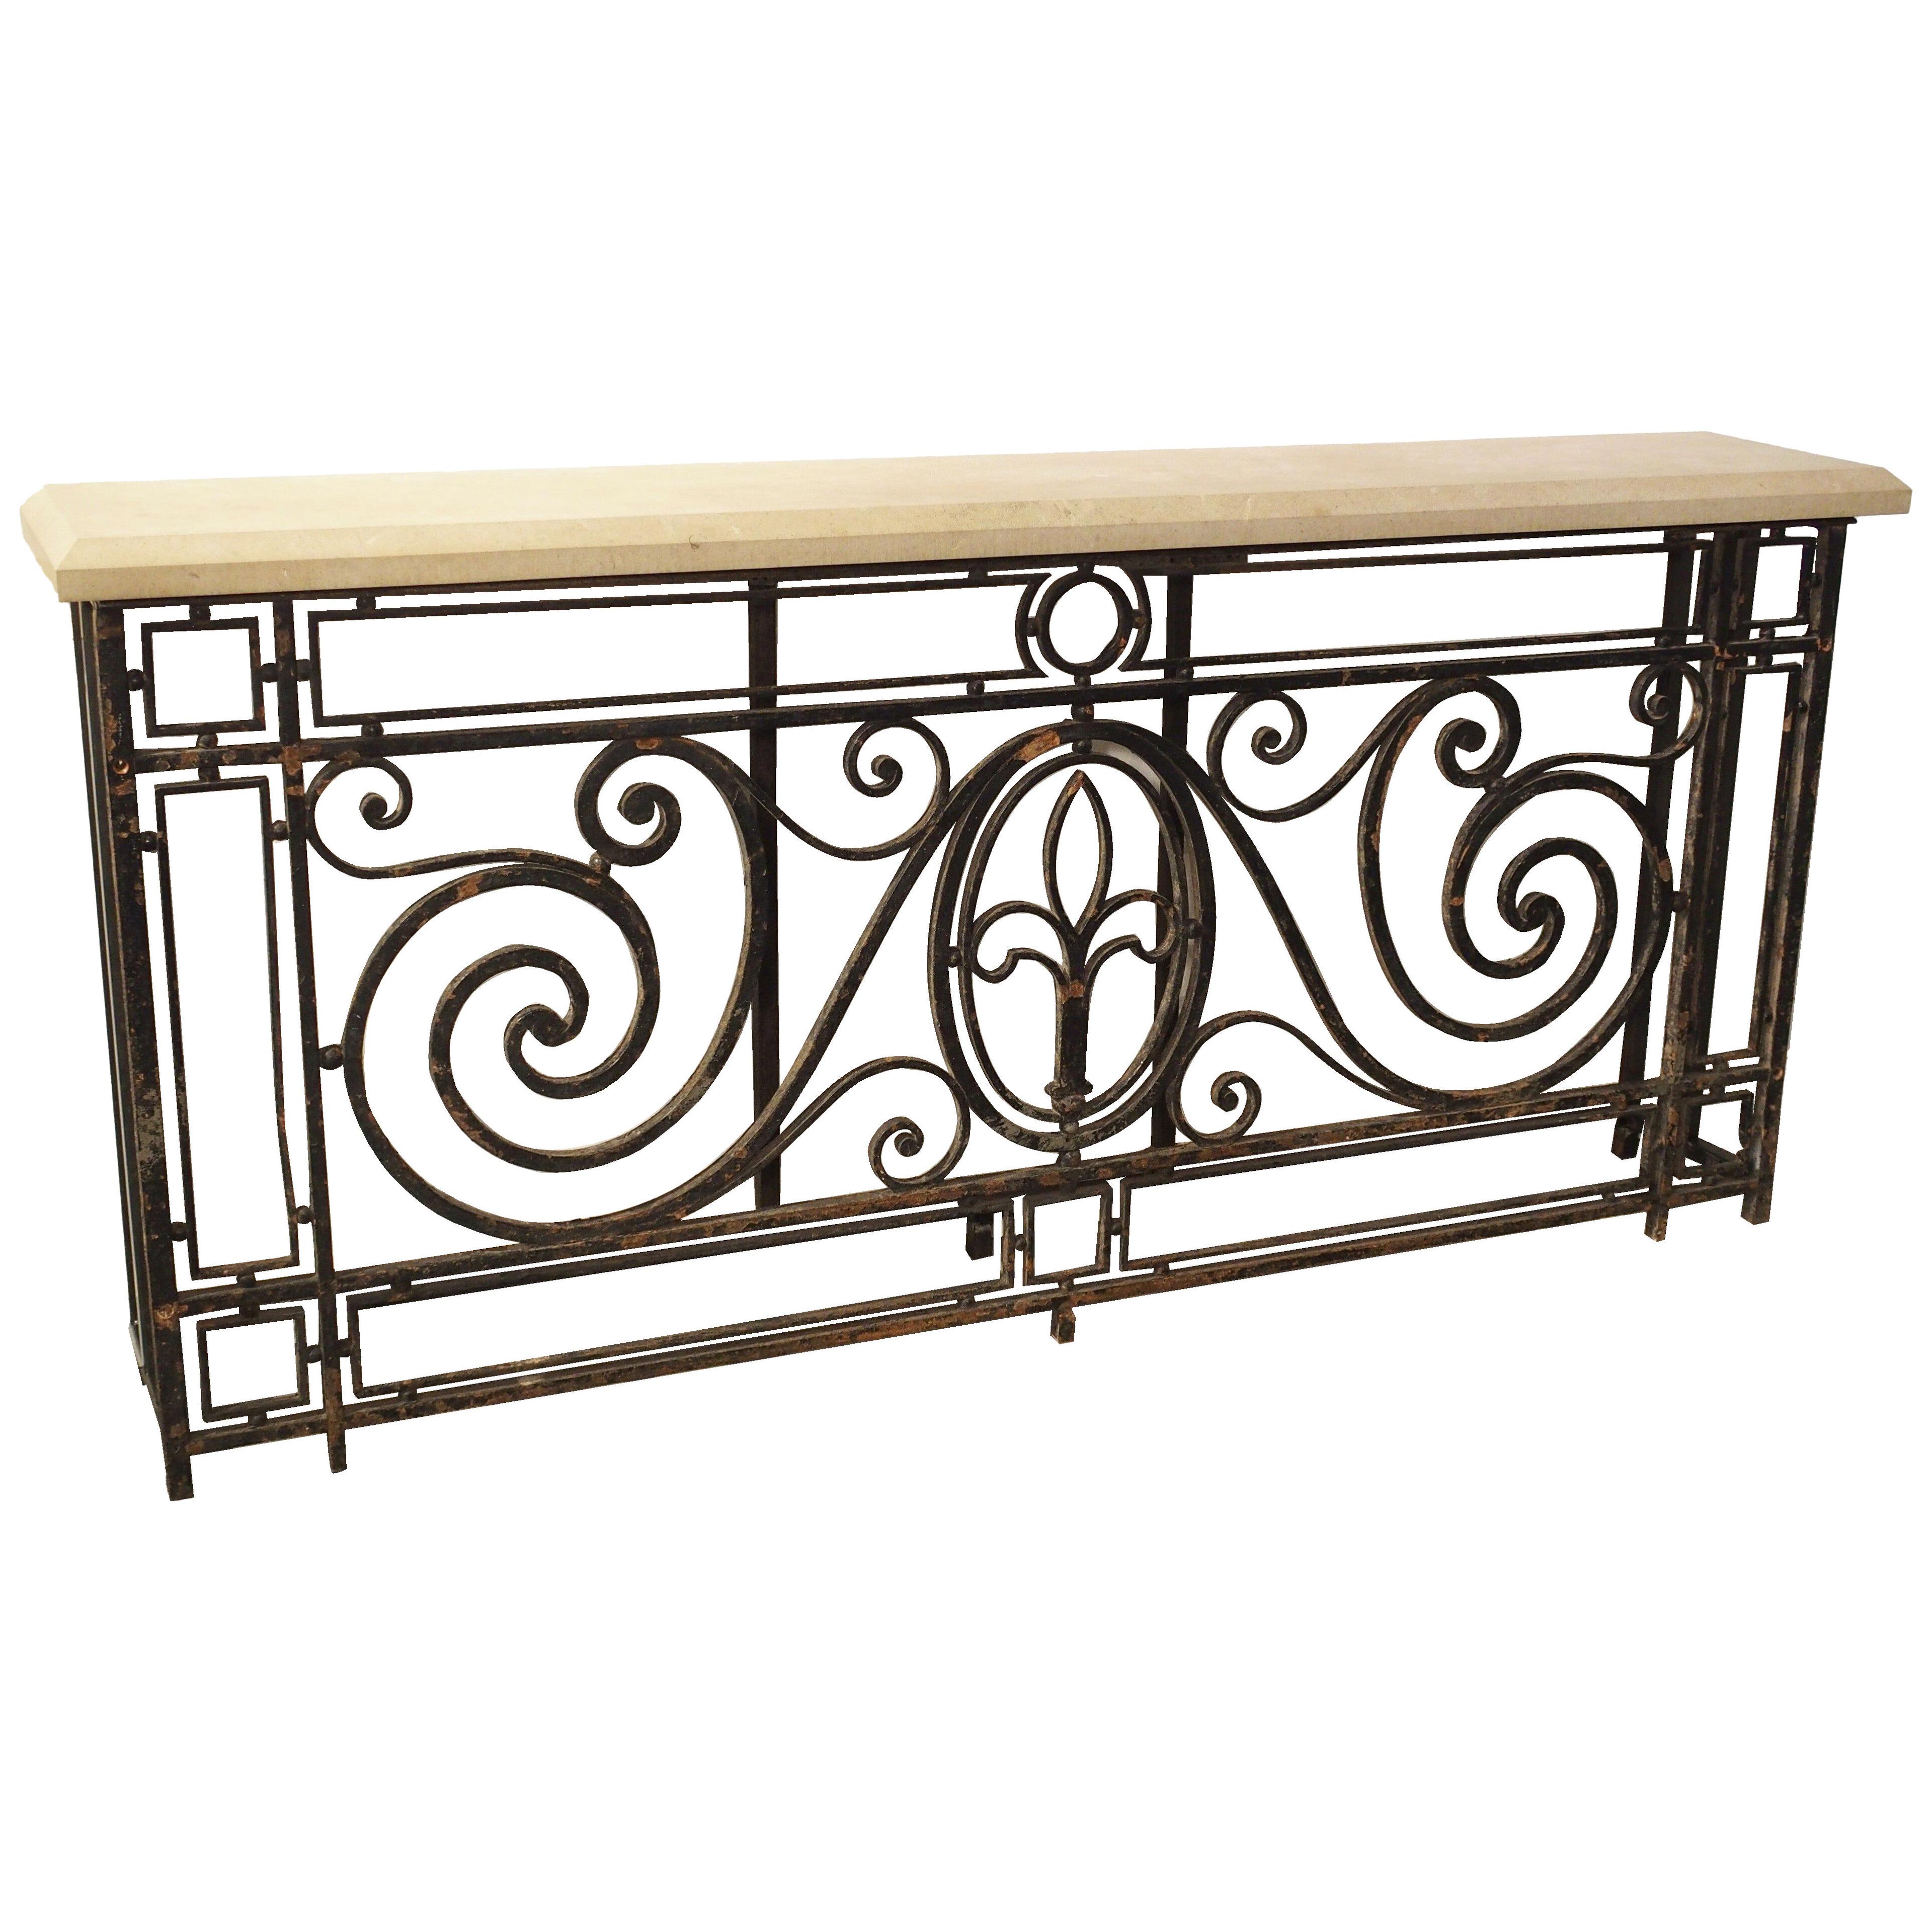 Antique Painted Wrought Iron Balcony Gate Console with Beveled Limestone Top